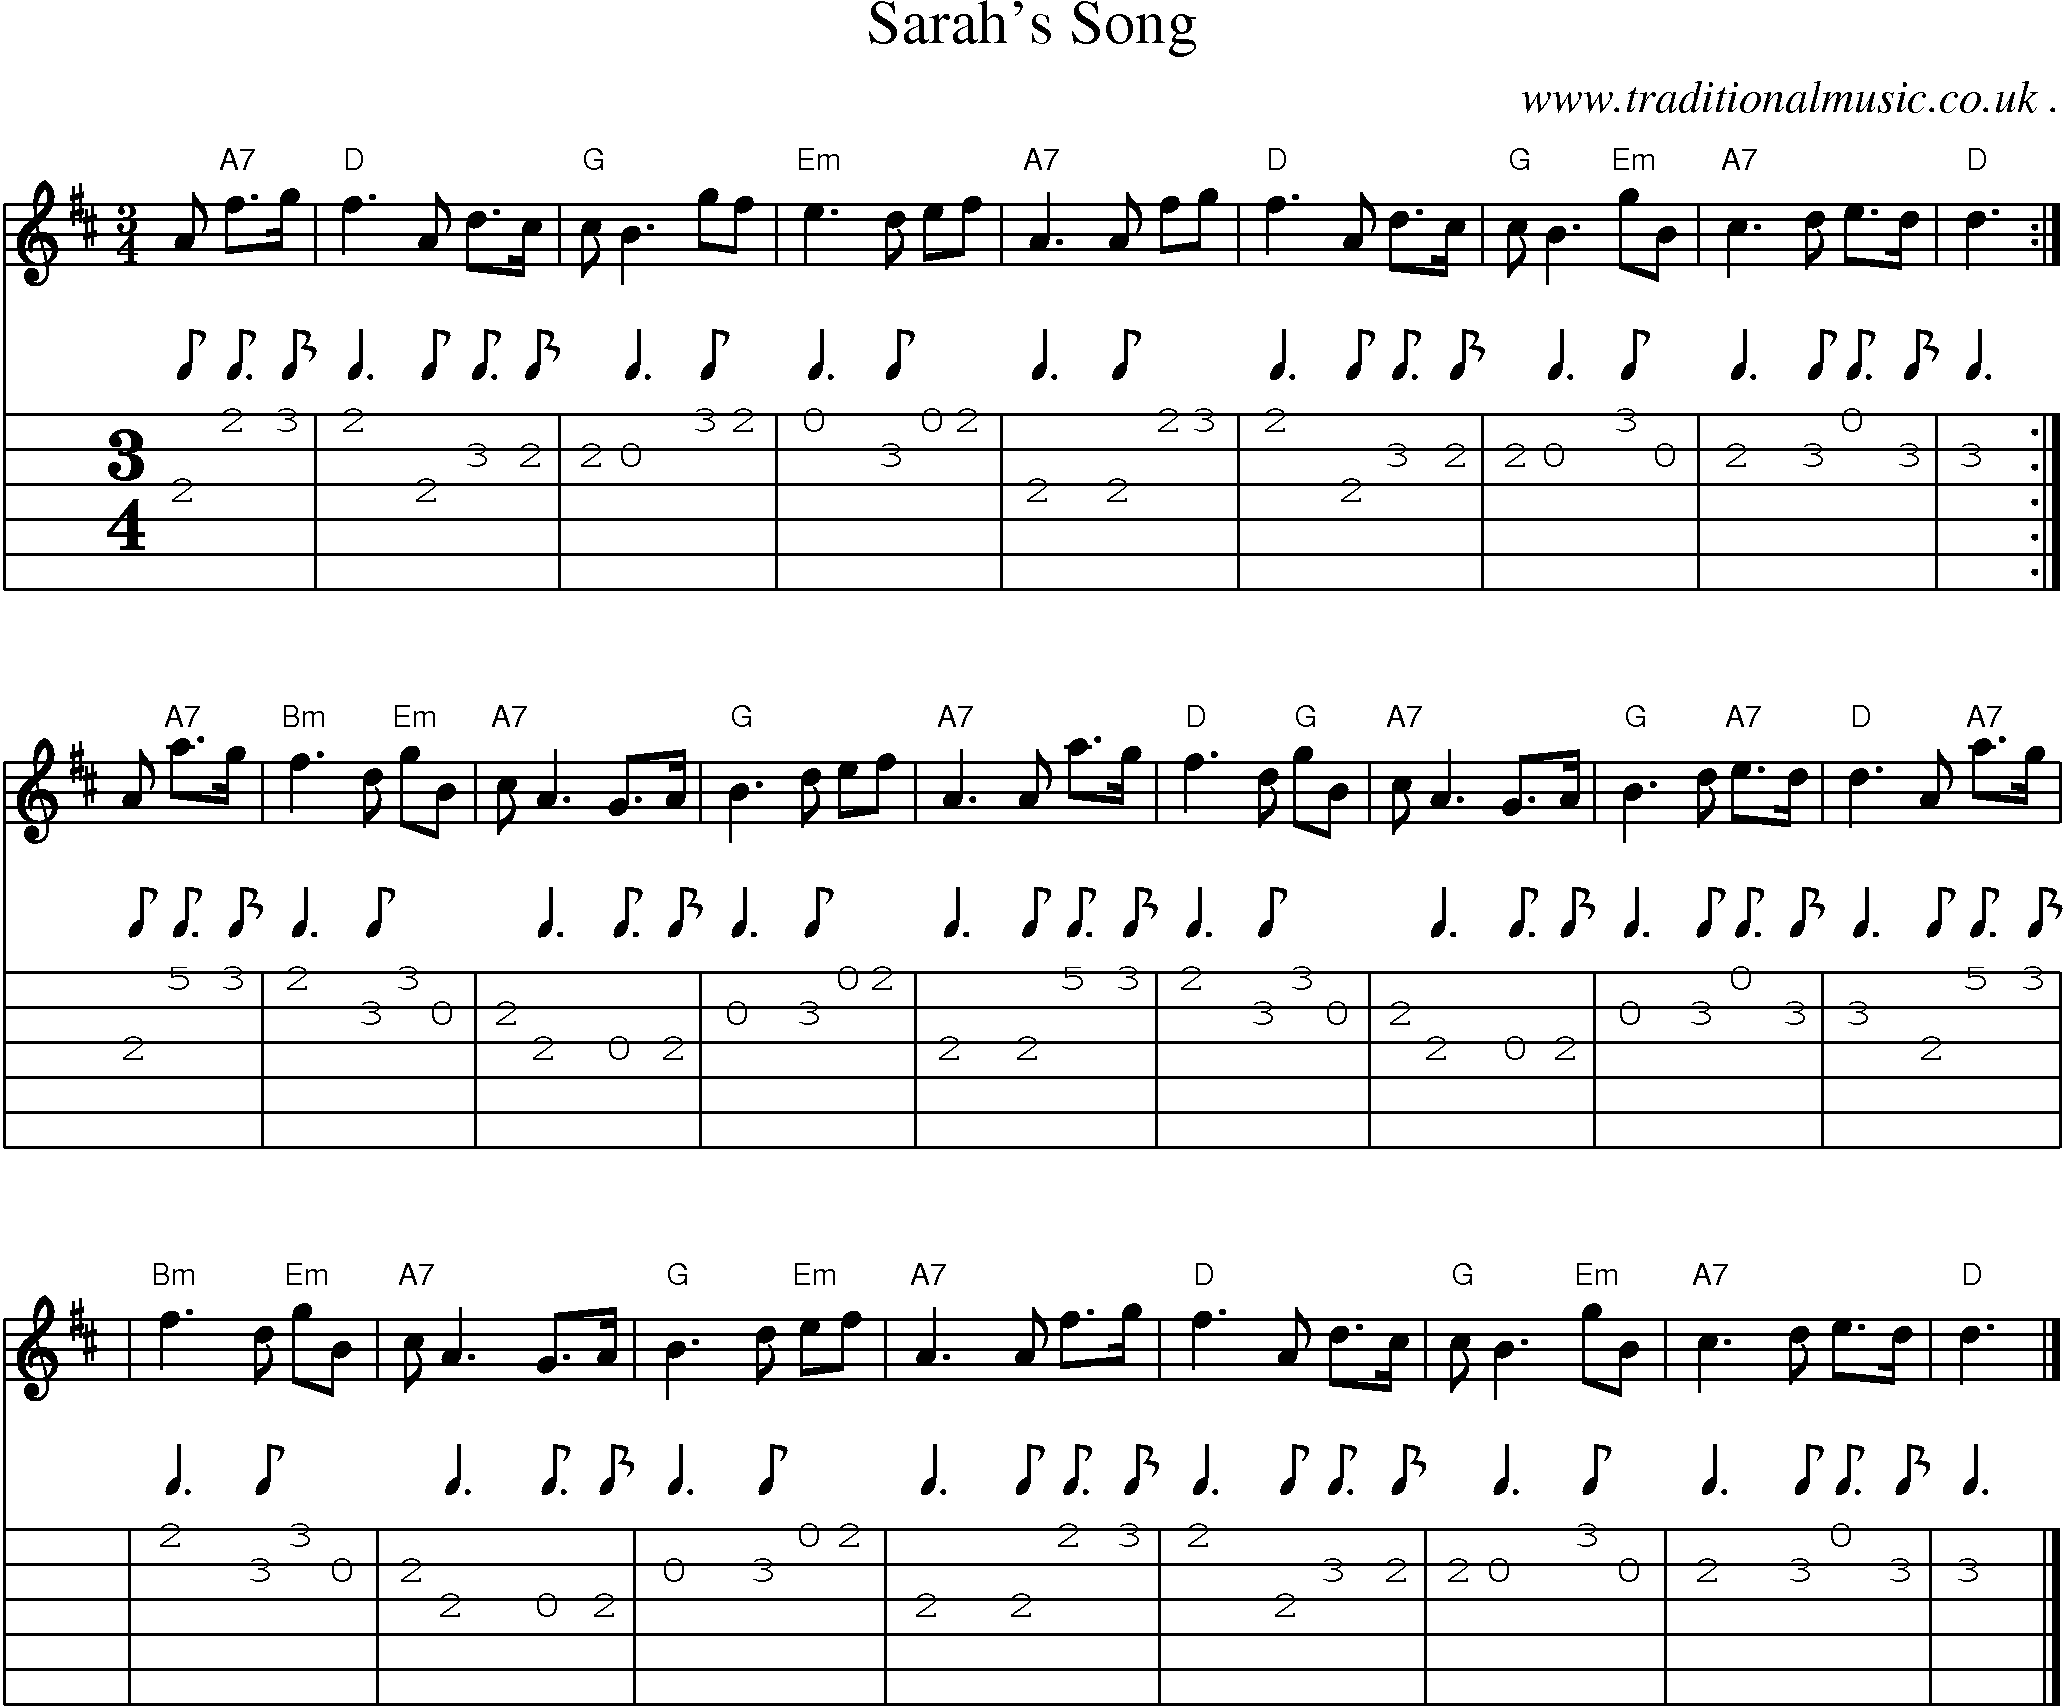 Sheet-music  score, Chords and Guitar Tabs for Sarahs Song